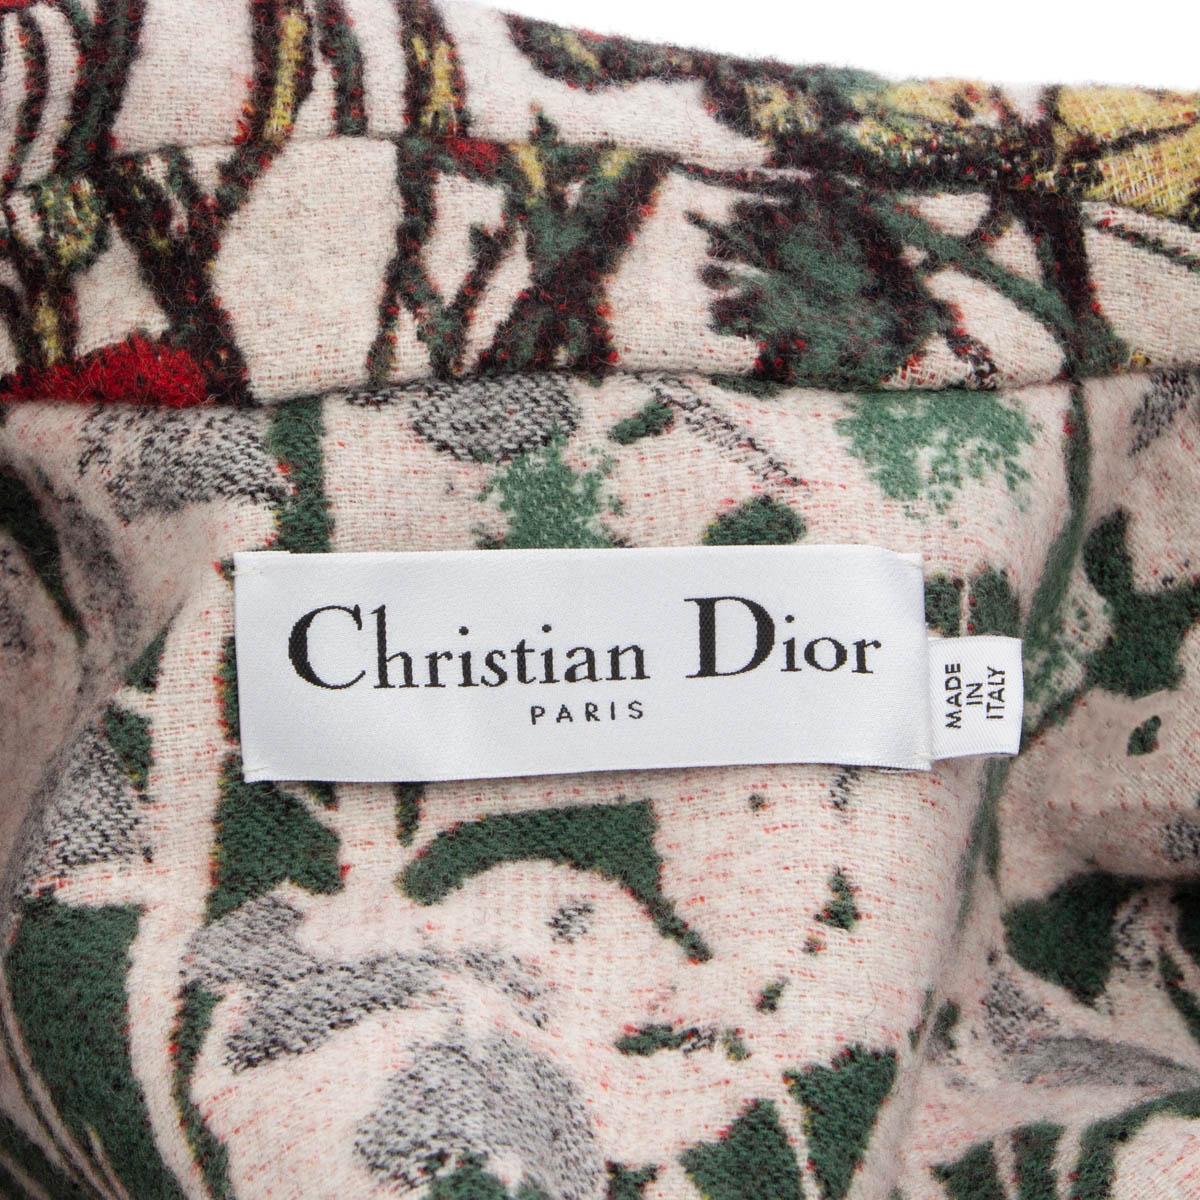 CHRISTIAN DIOR red green wool 2021 FLORAL BELTED FRINGED KNIT Coat Jacket 38 S For Sale 1